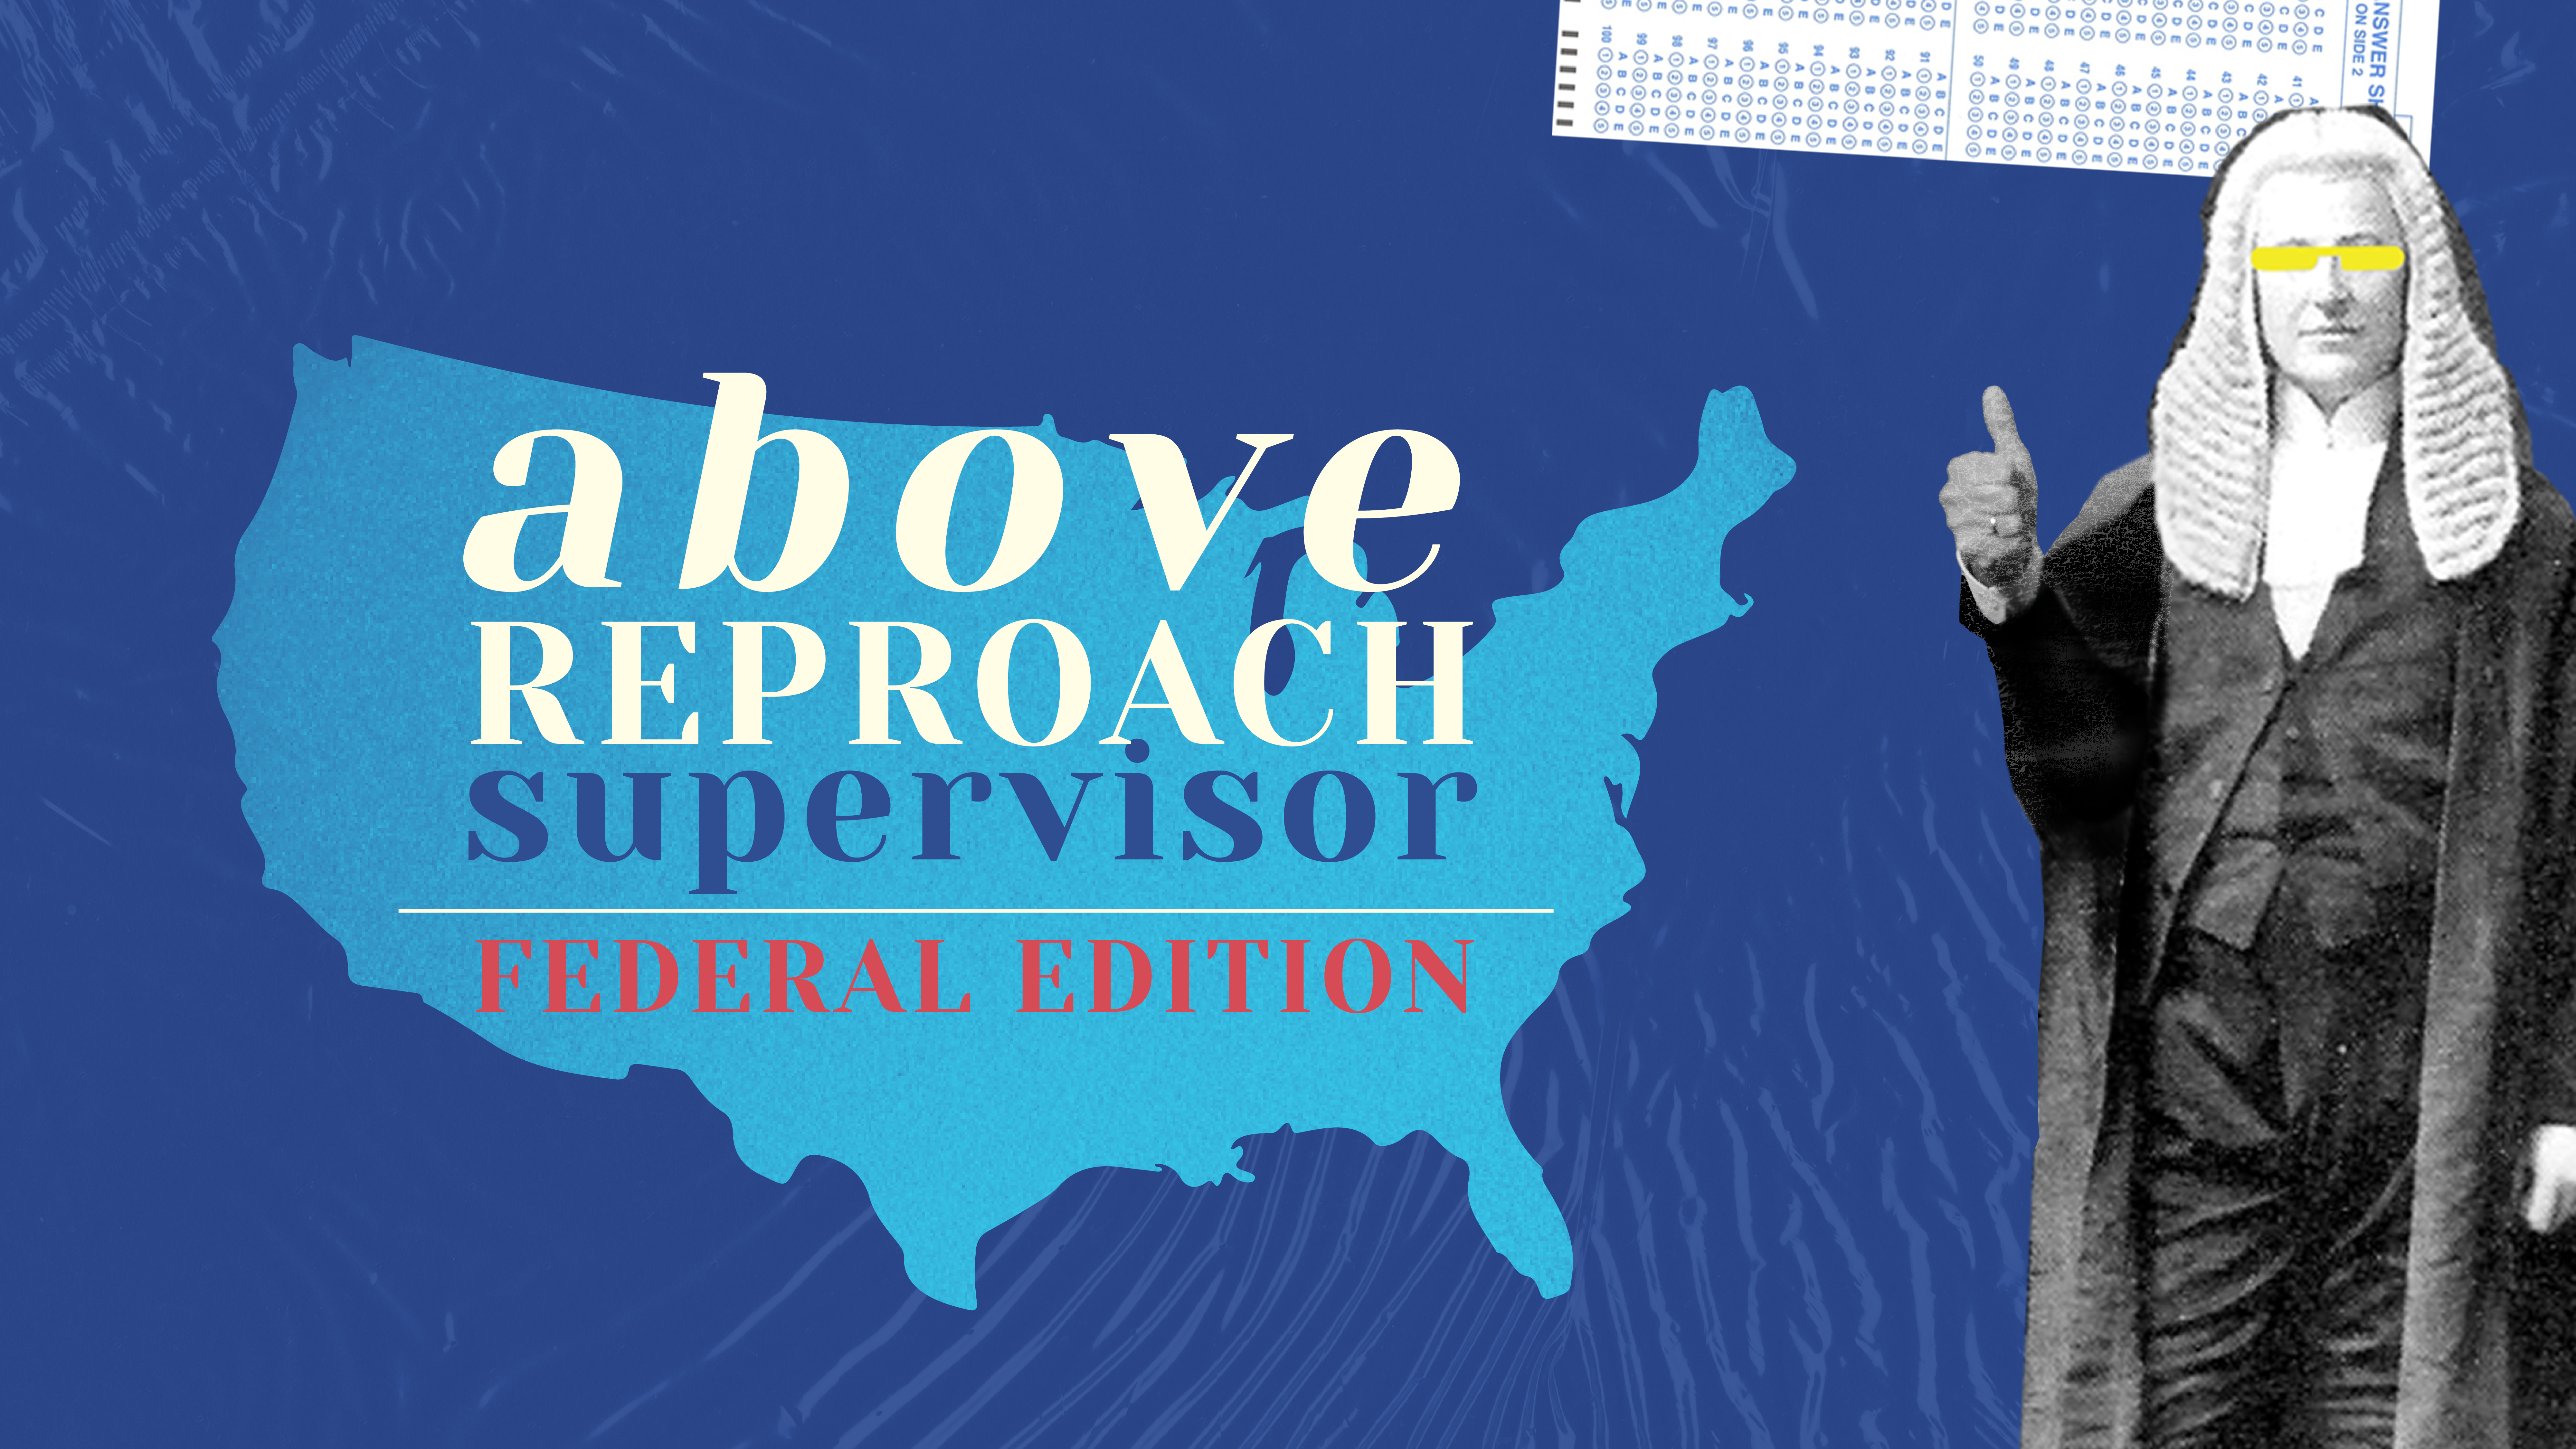 Featured image for “Above Reproach Supervisor (Federal Version)”